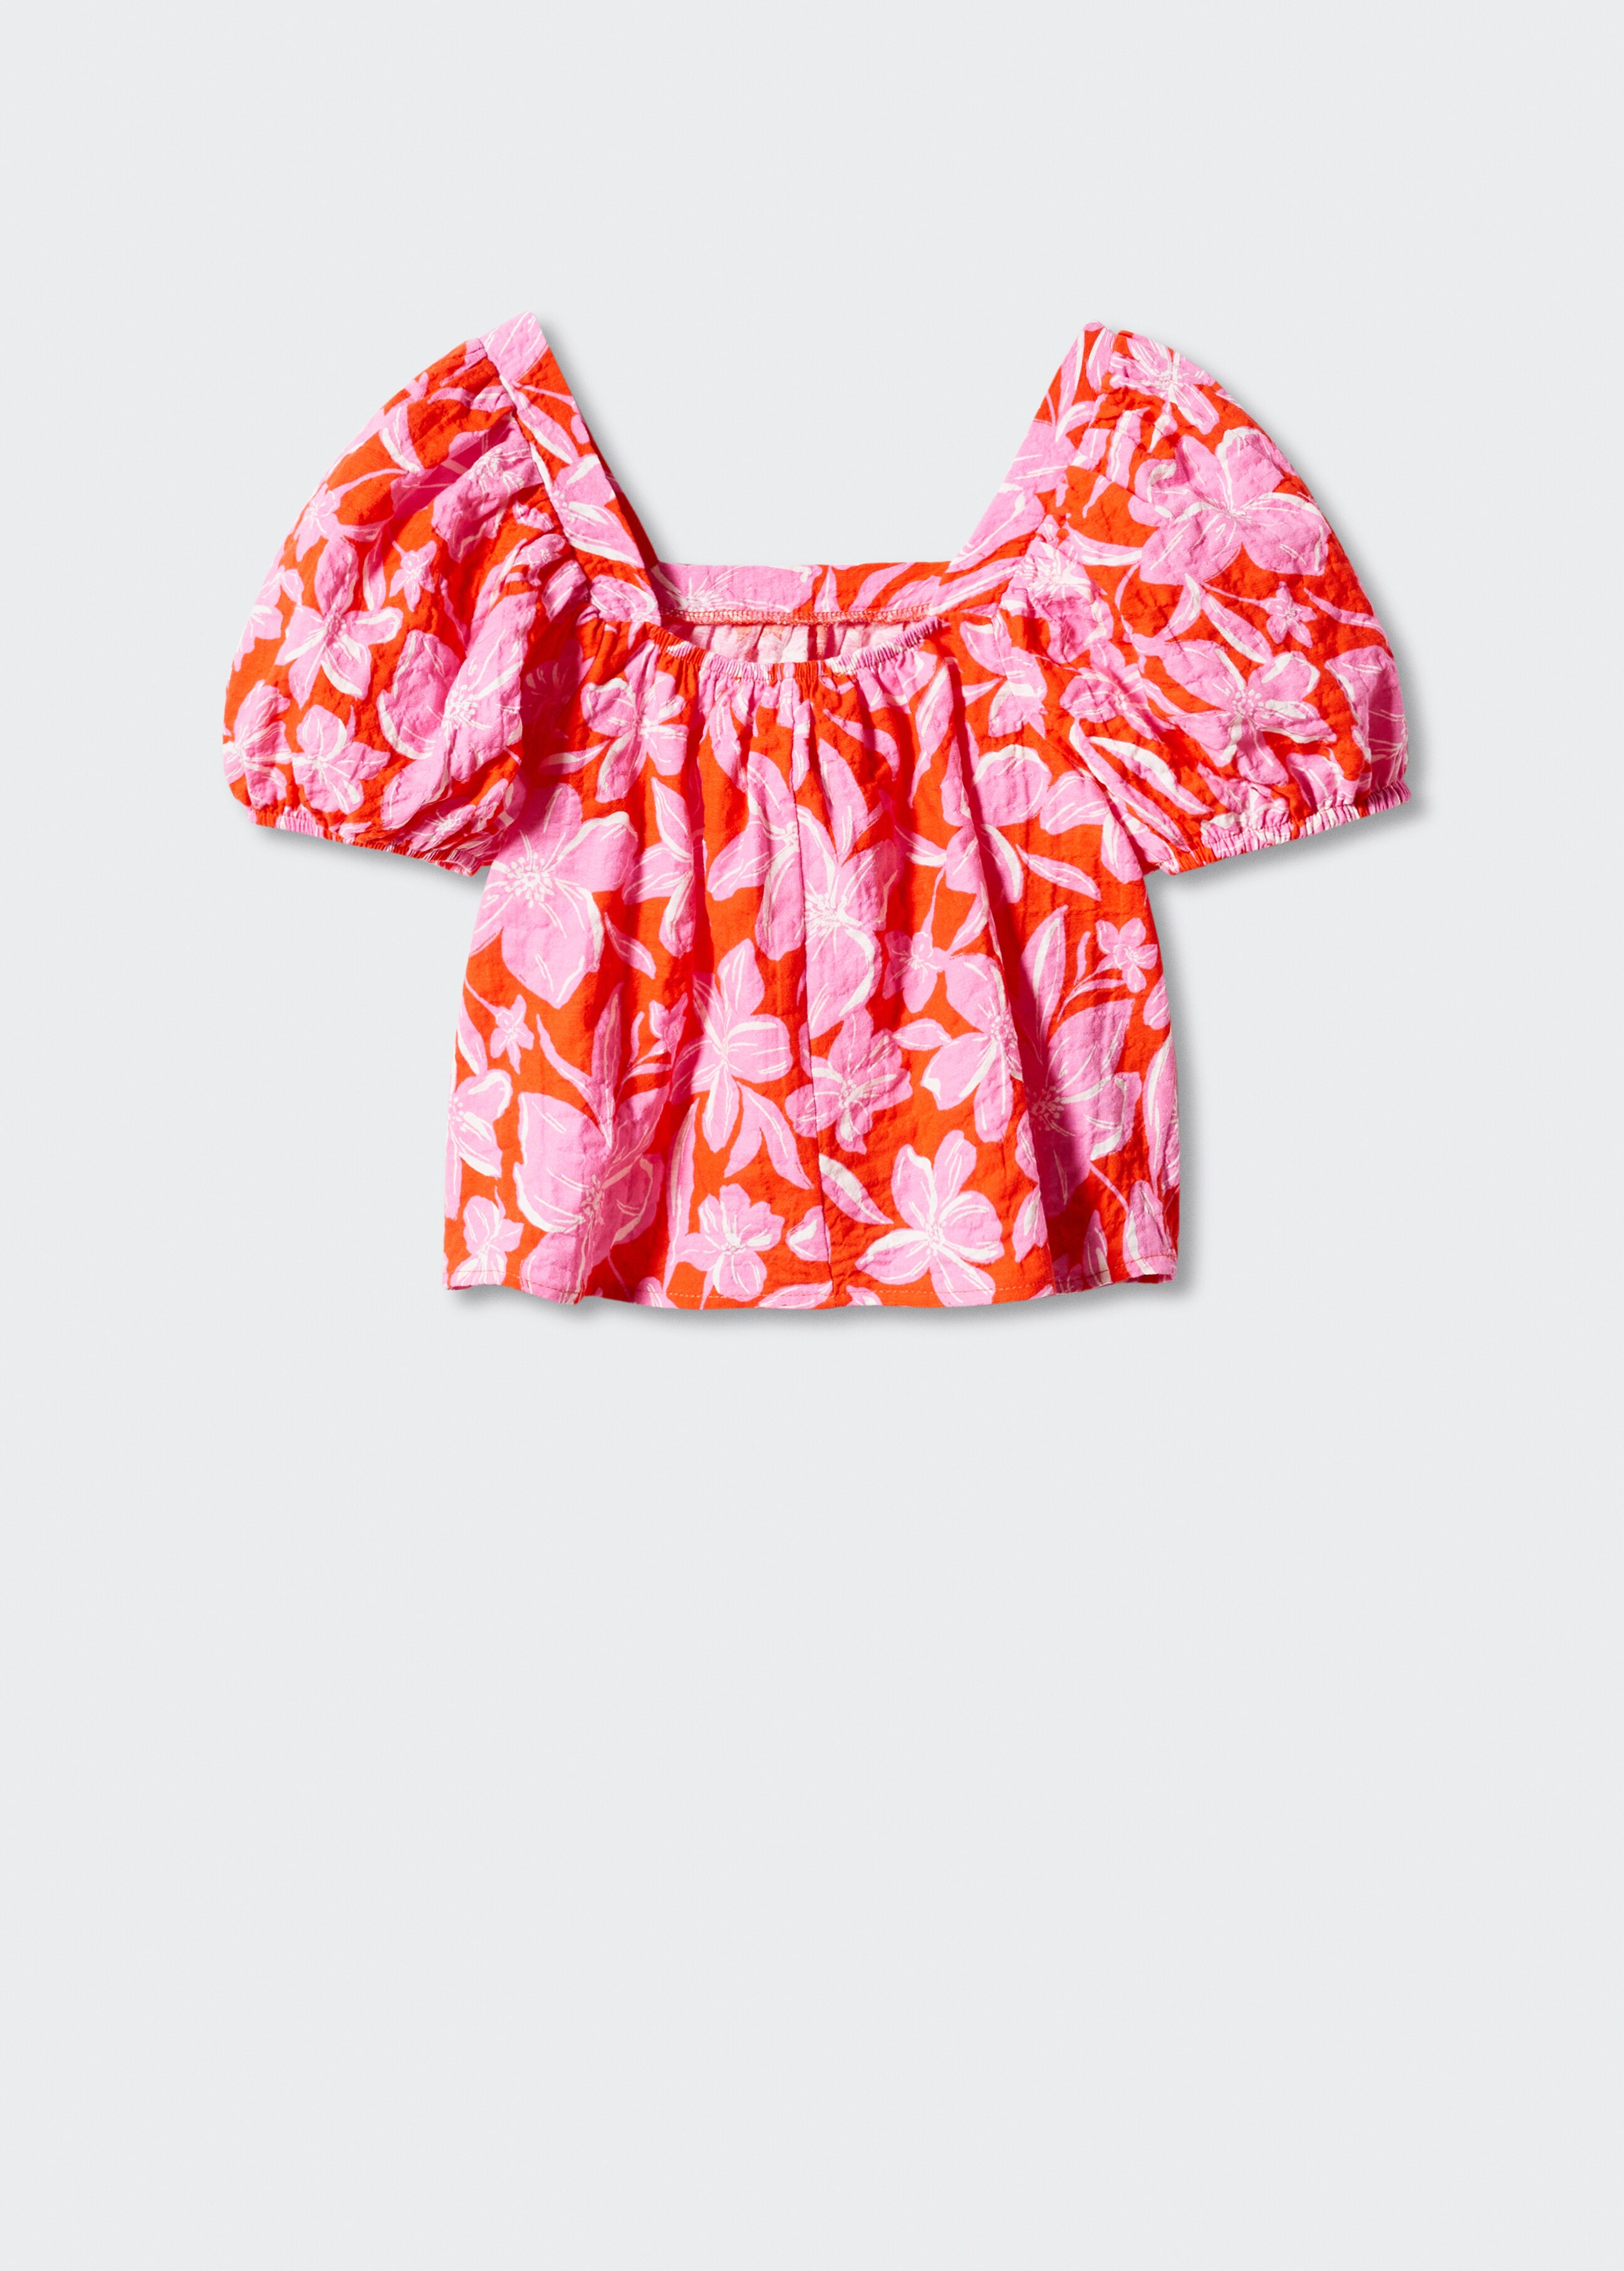 Floral print blouse - Reverse of the article